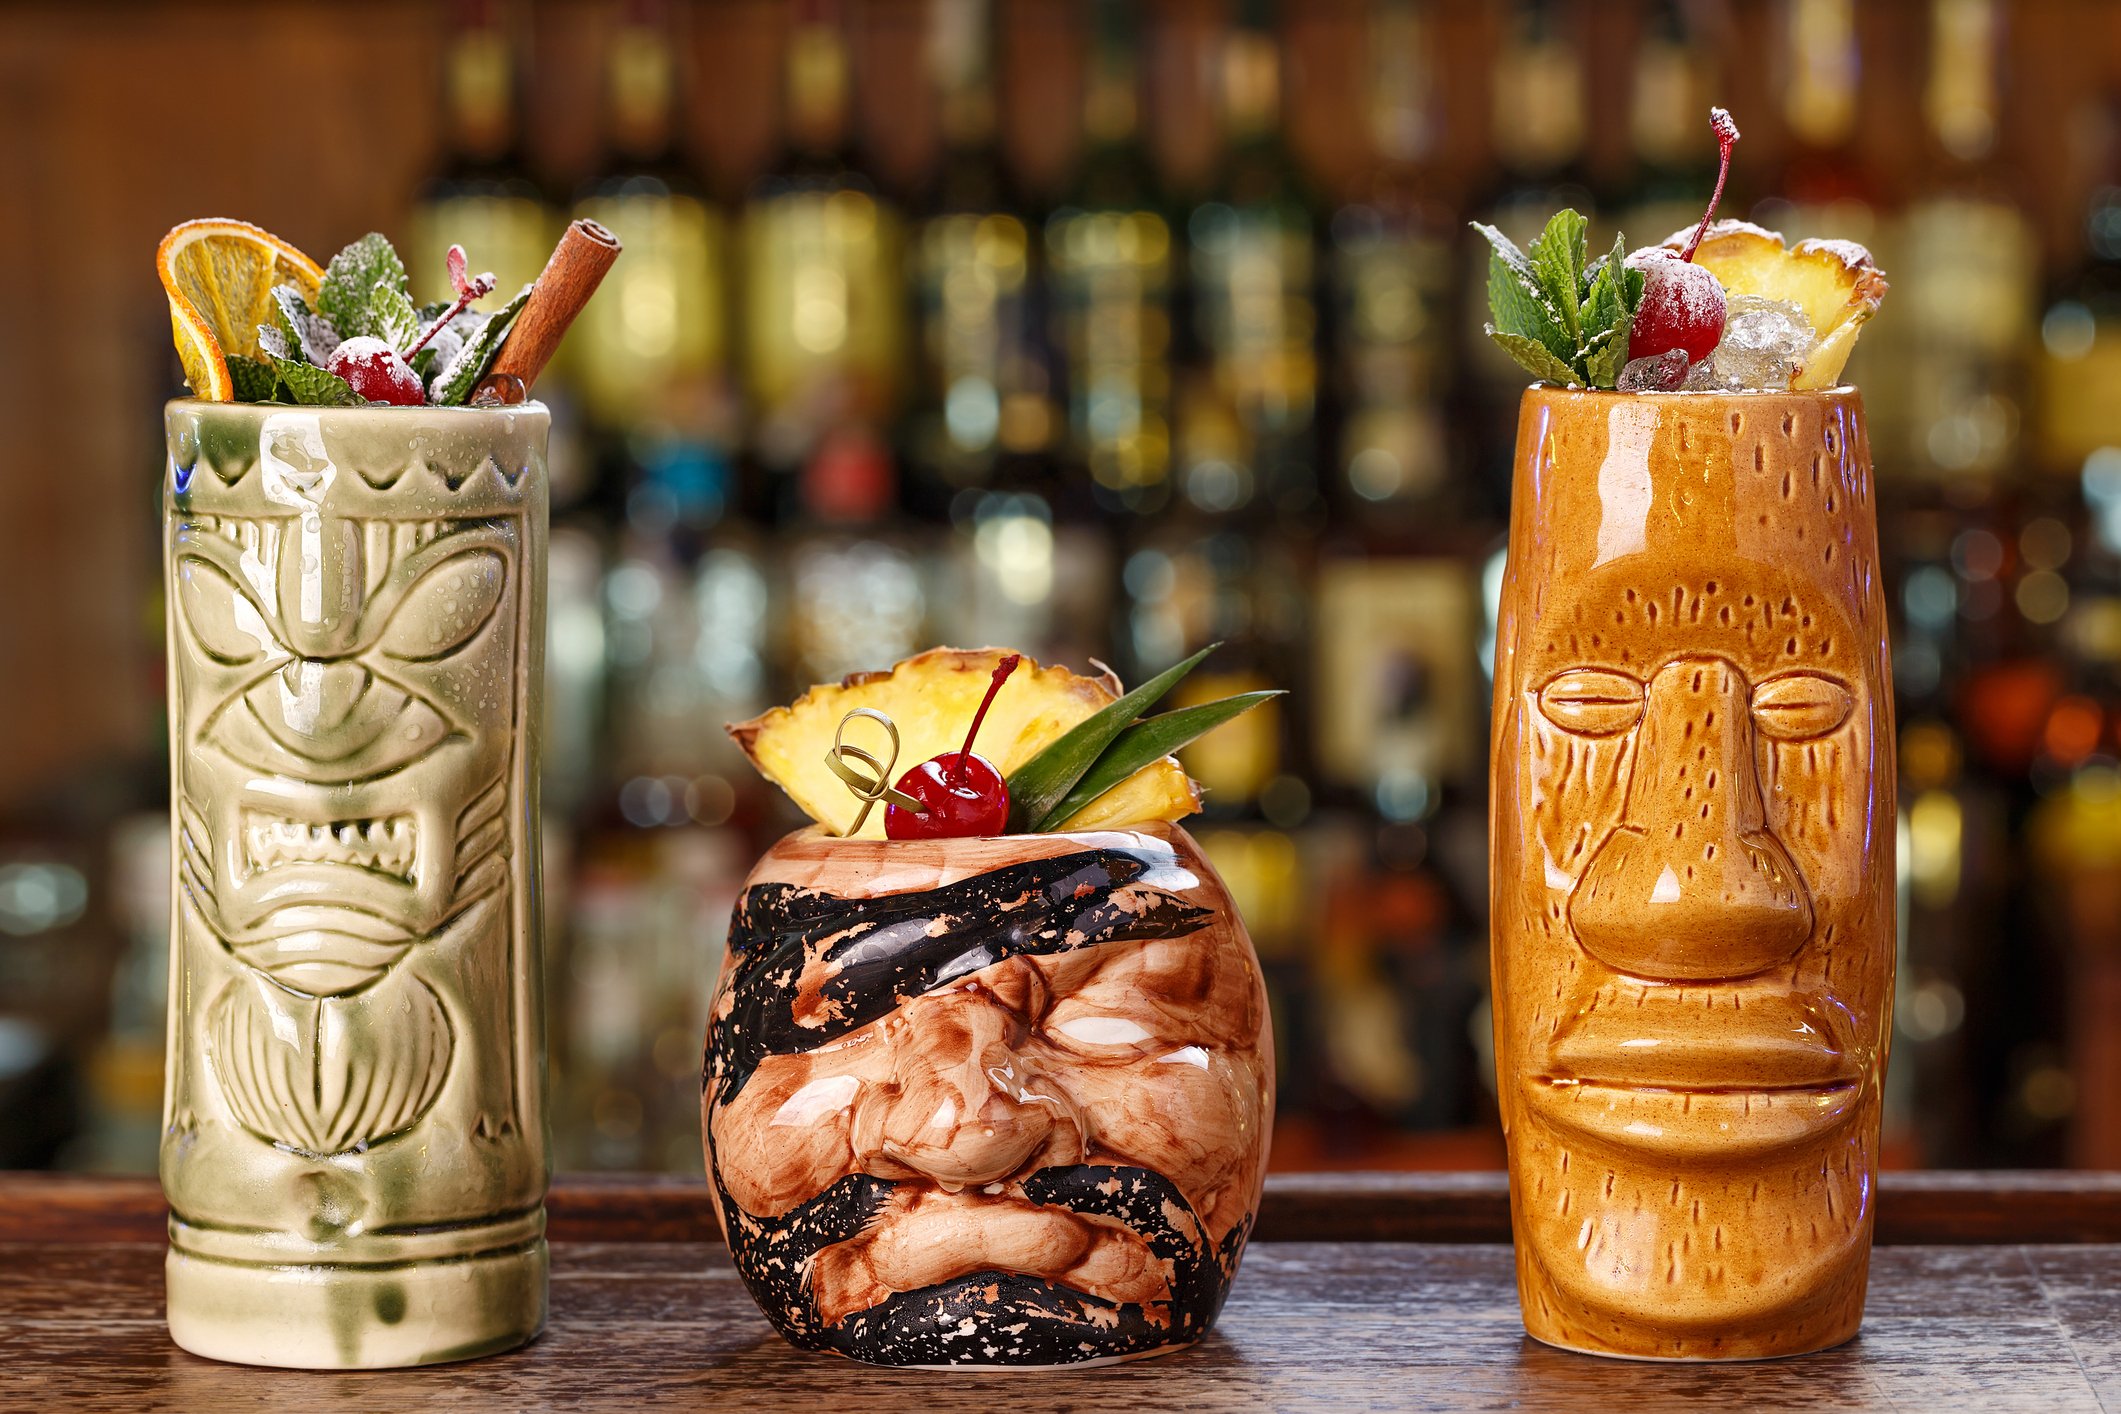 Drinks in Tiki themed cups prepared at Belle's Beach House